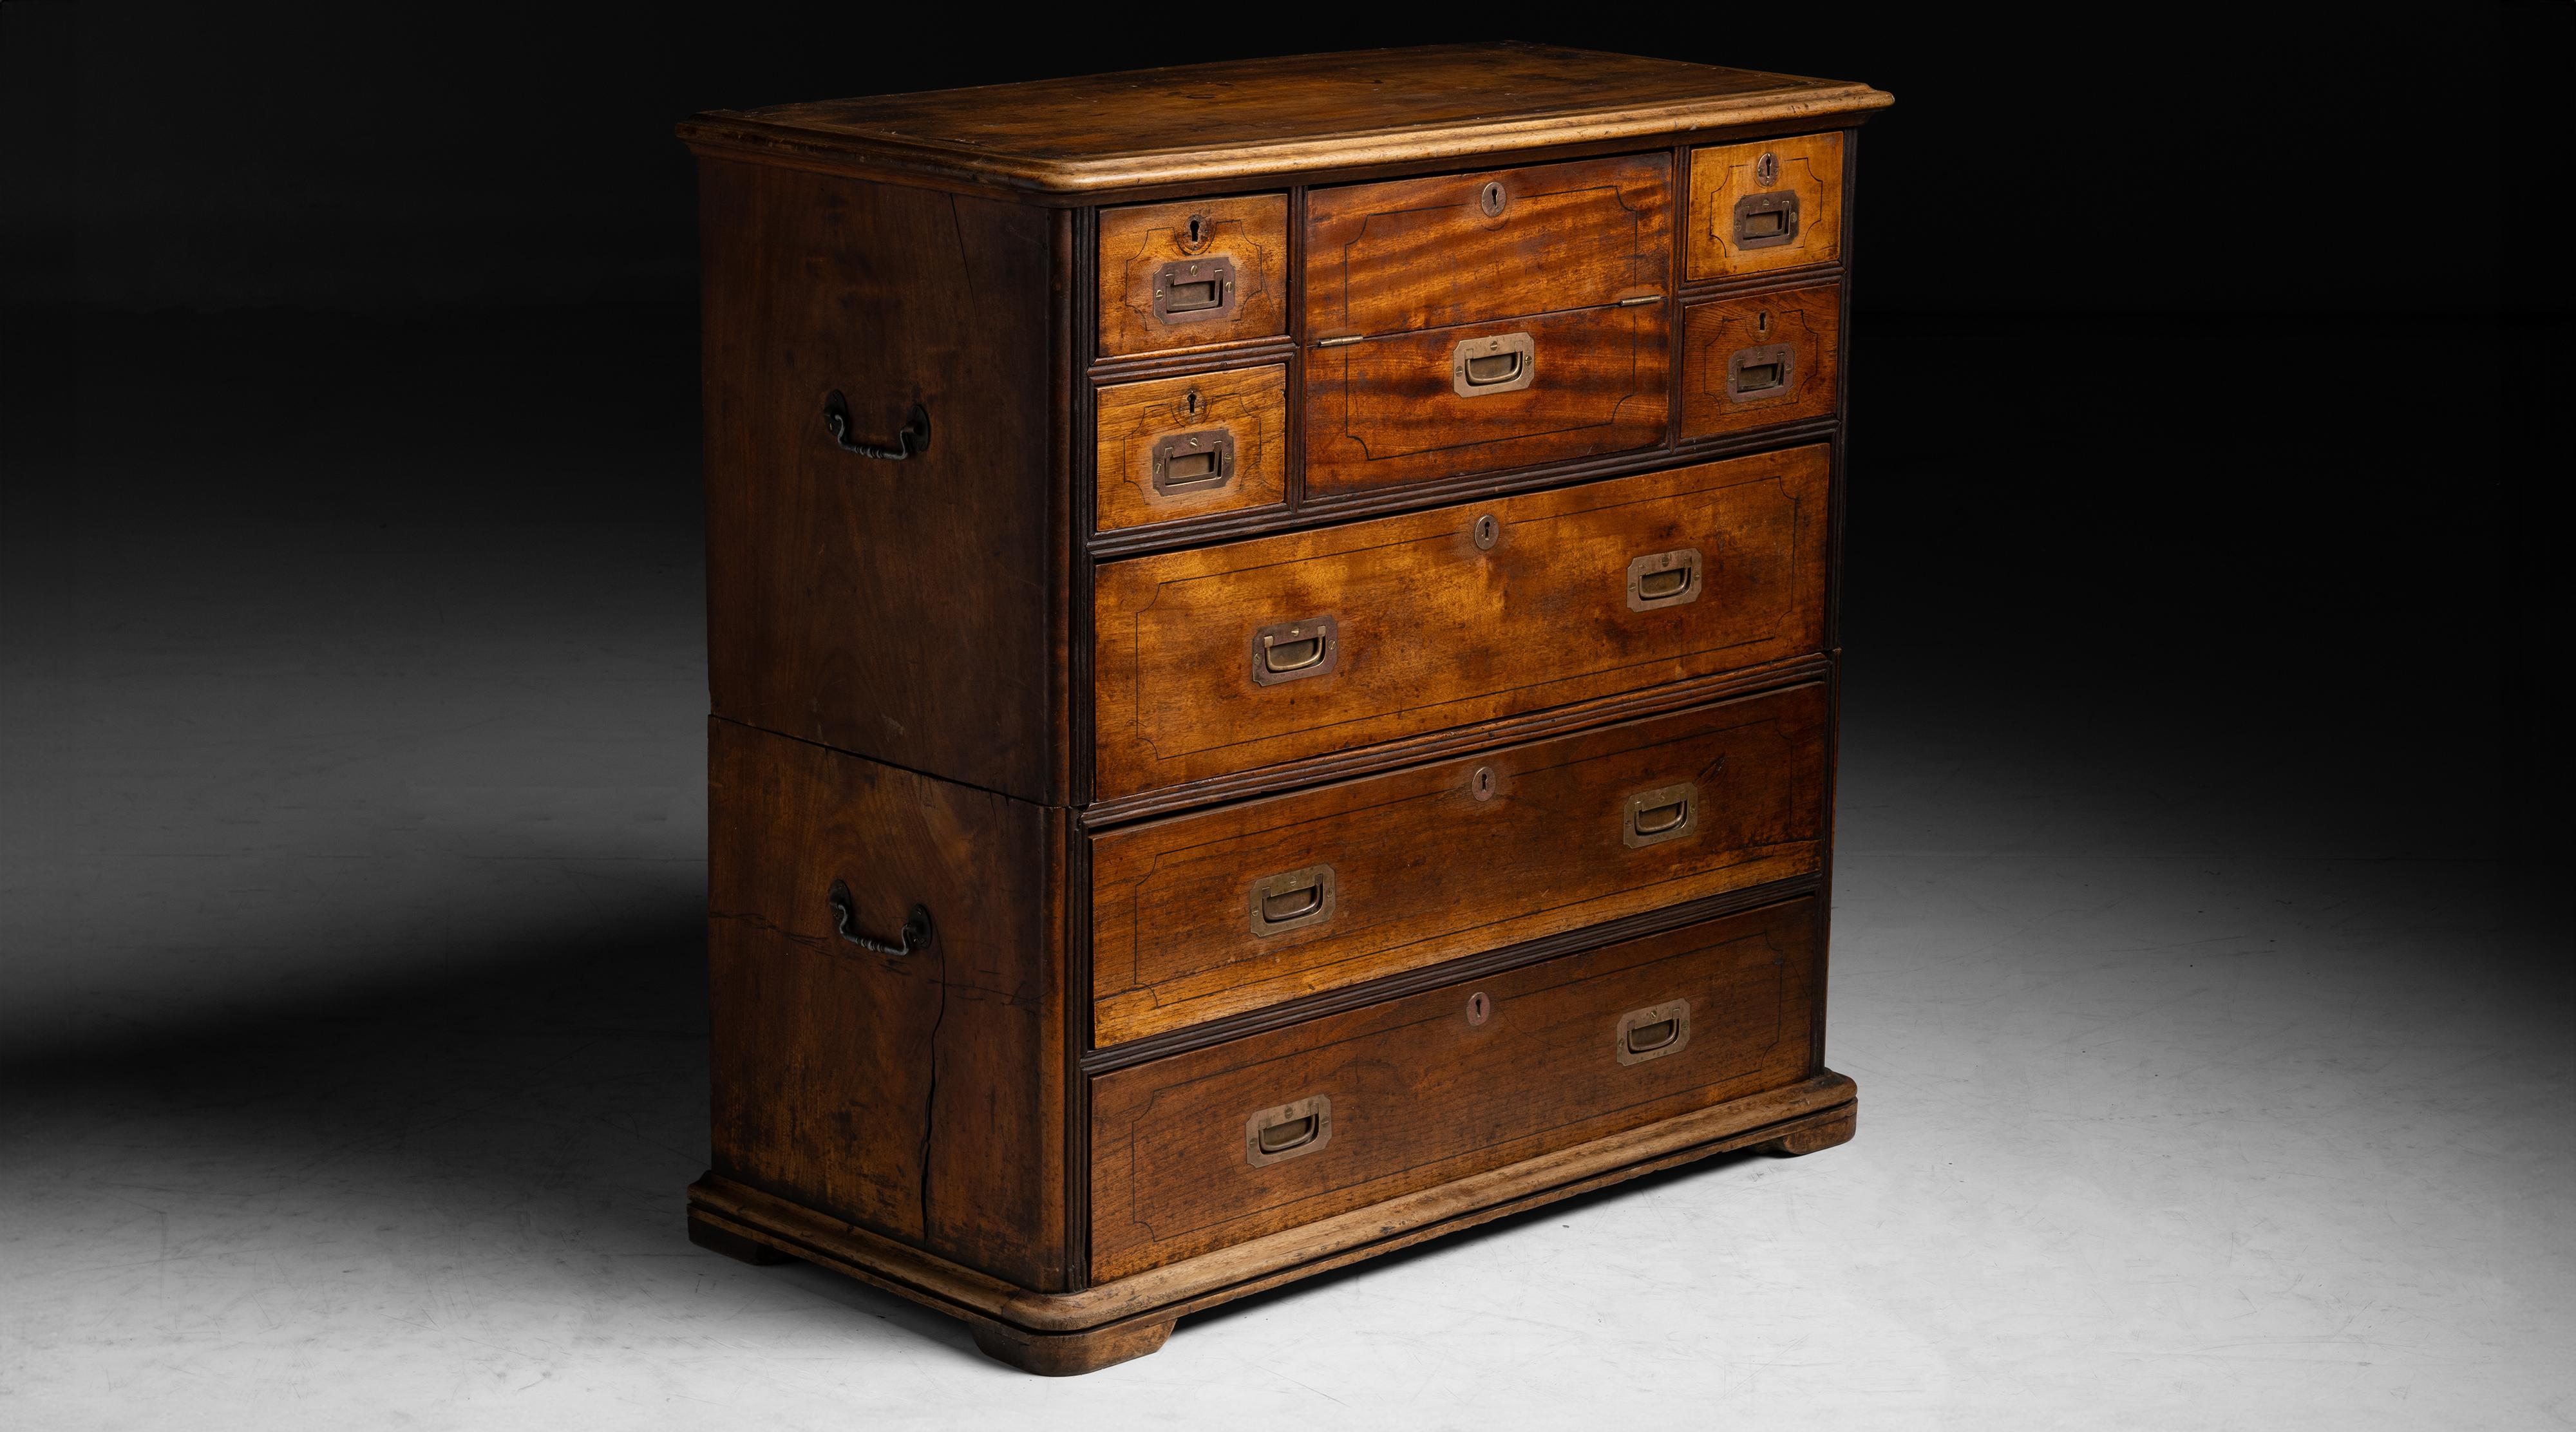 Campaign Chest of Drawers
England circa 1920
Navy chest of drawers with hidden compartments.
38”w x 18.5”d x 35.25”h